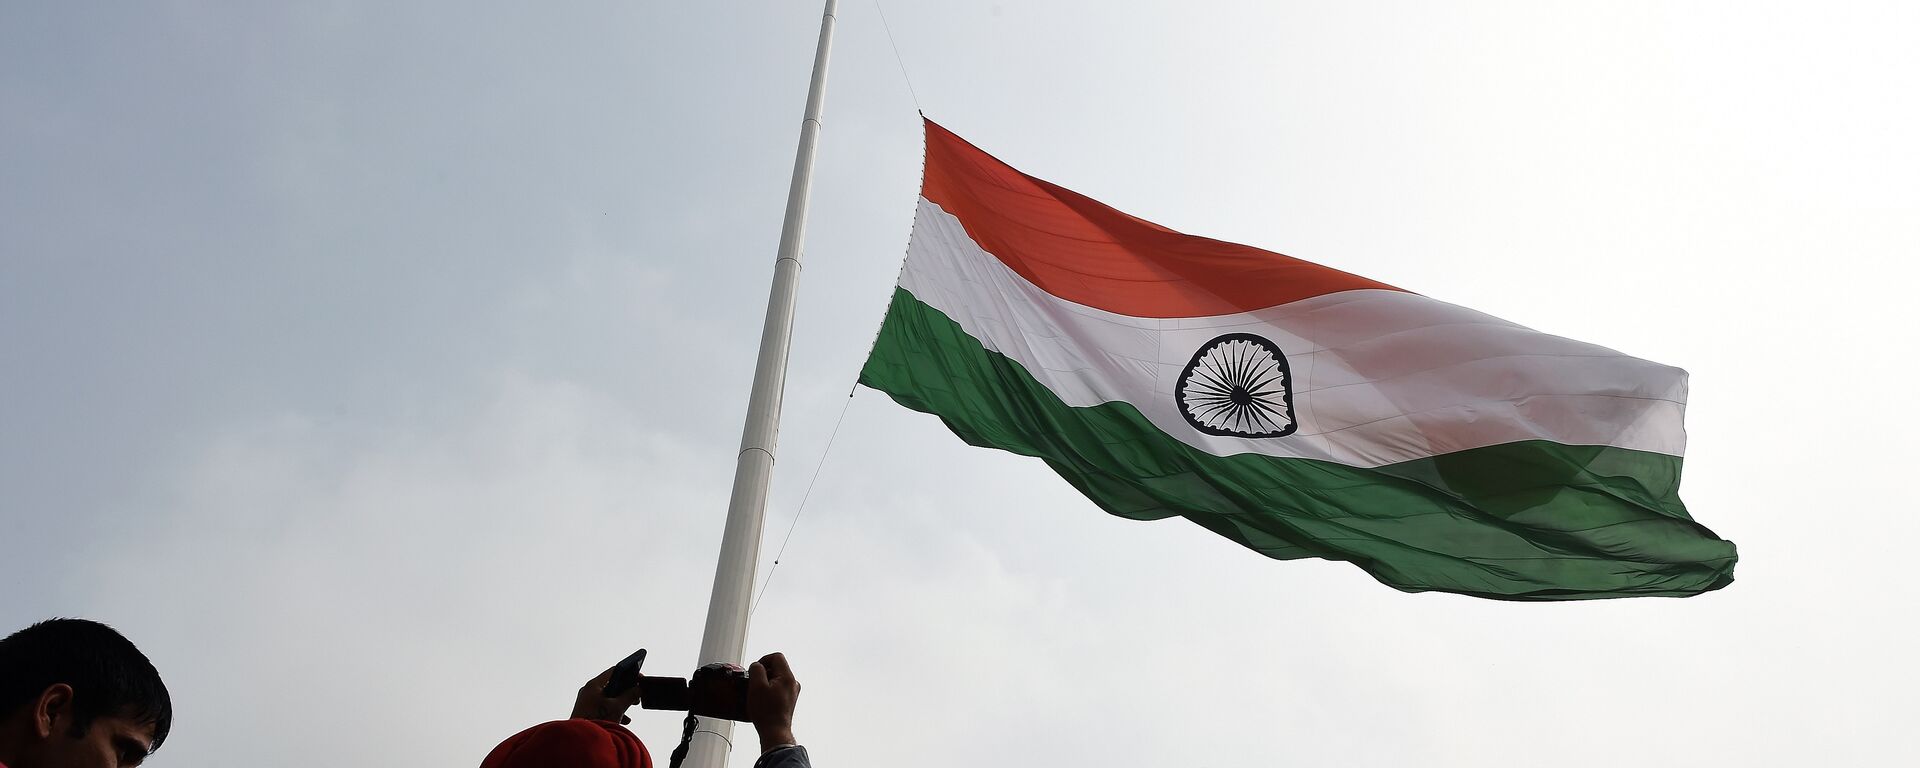 Indian residents photograph India's tallest flag as it is unveiled in Faridabad on the outskirts of New Delhi on March 3, 2015 - Sputnik International, 1920, 16.06.2020